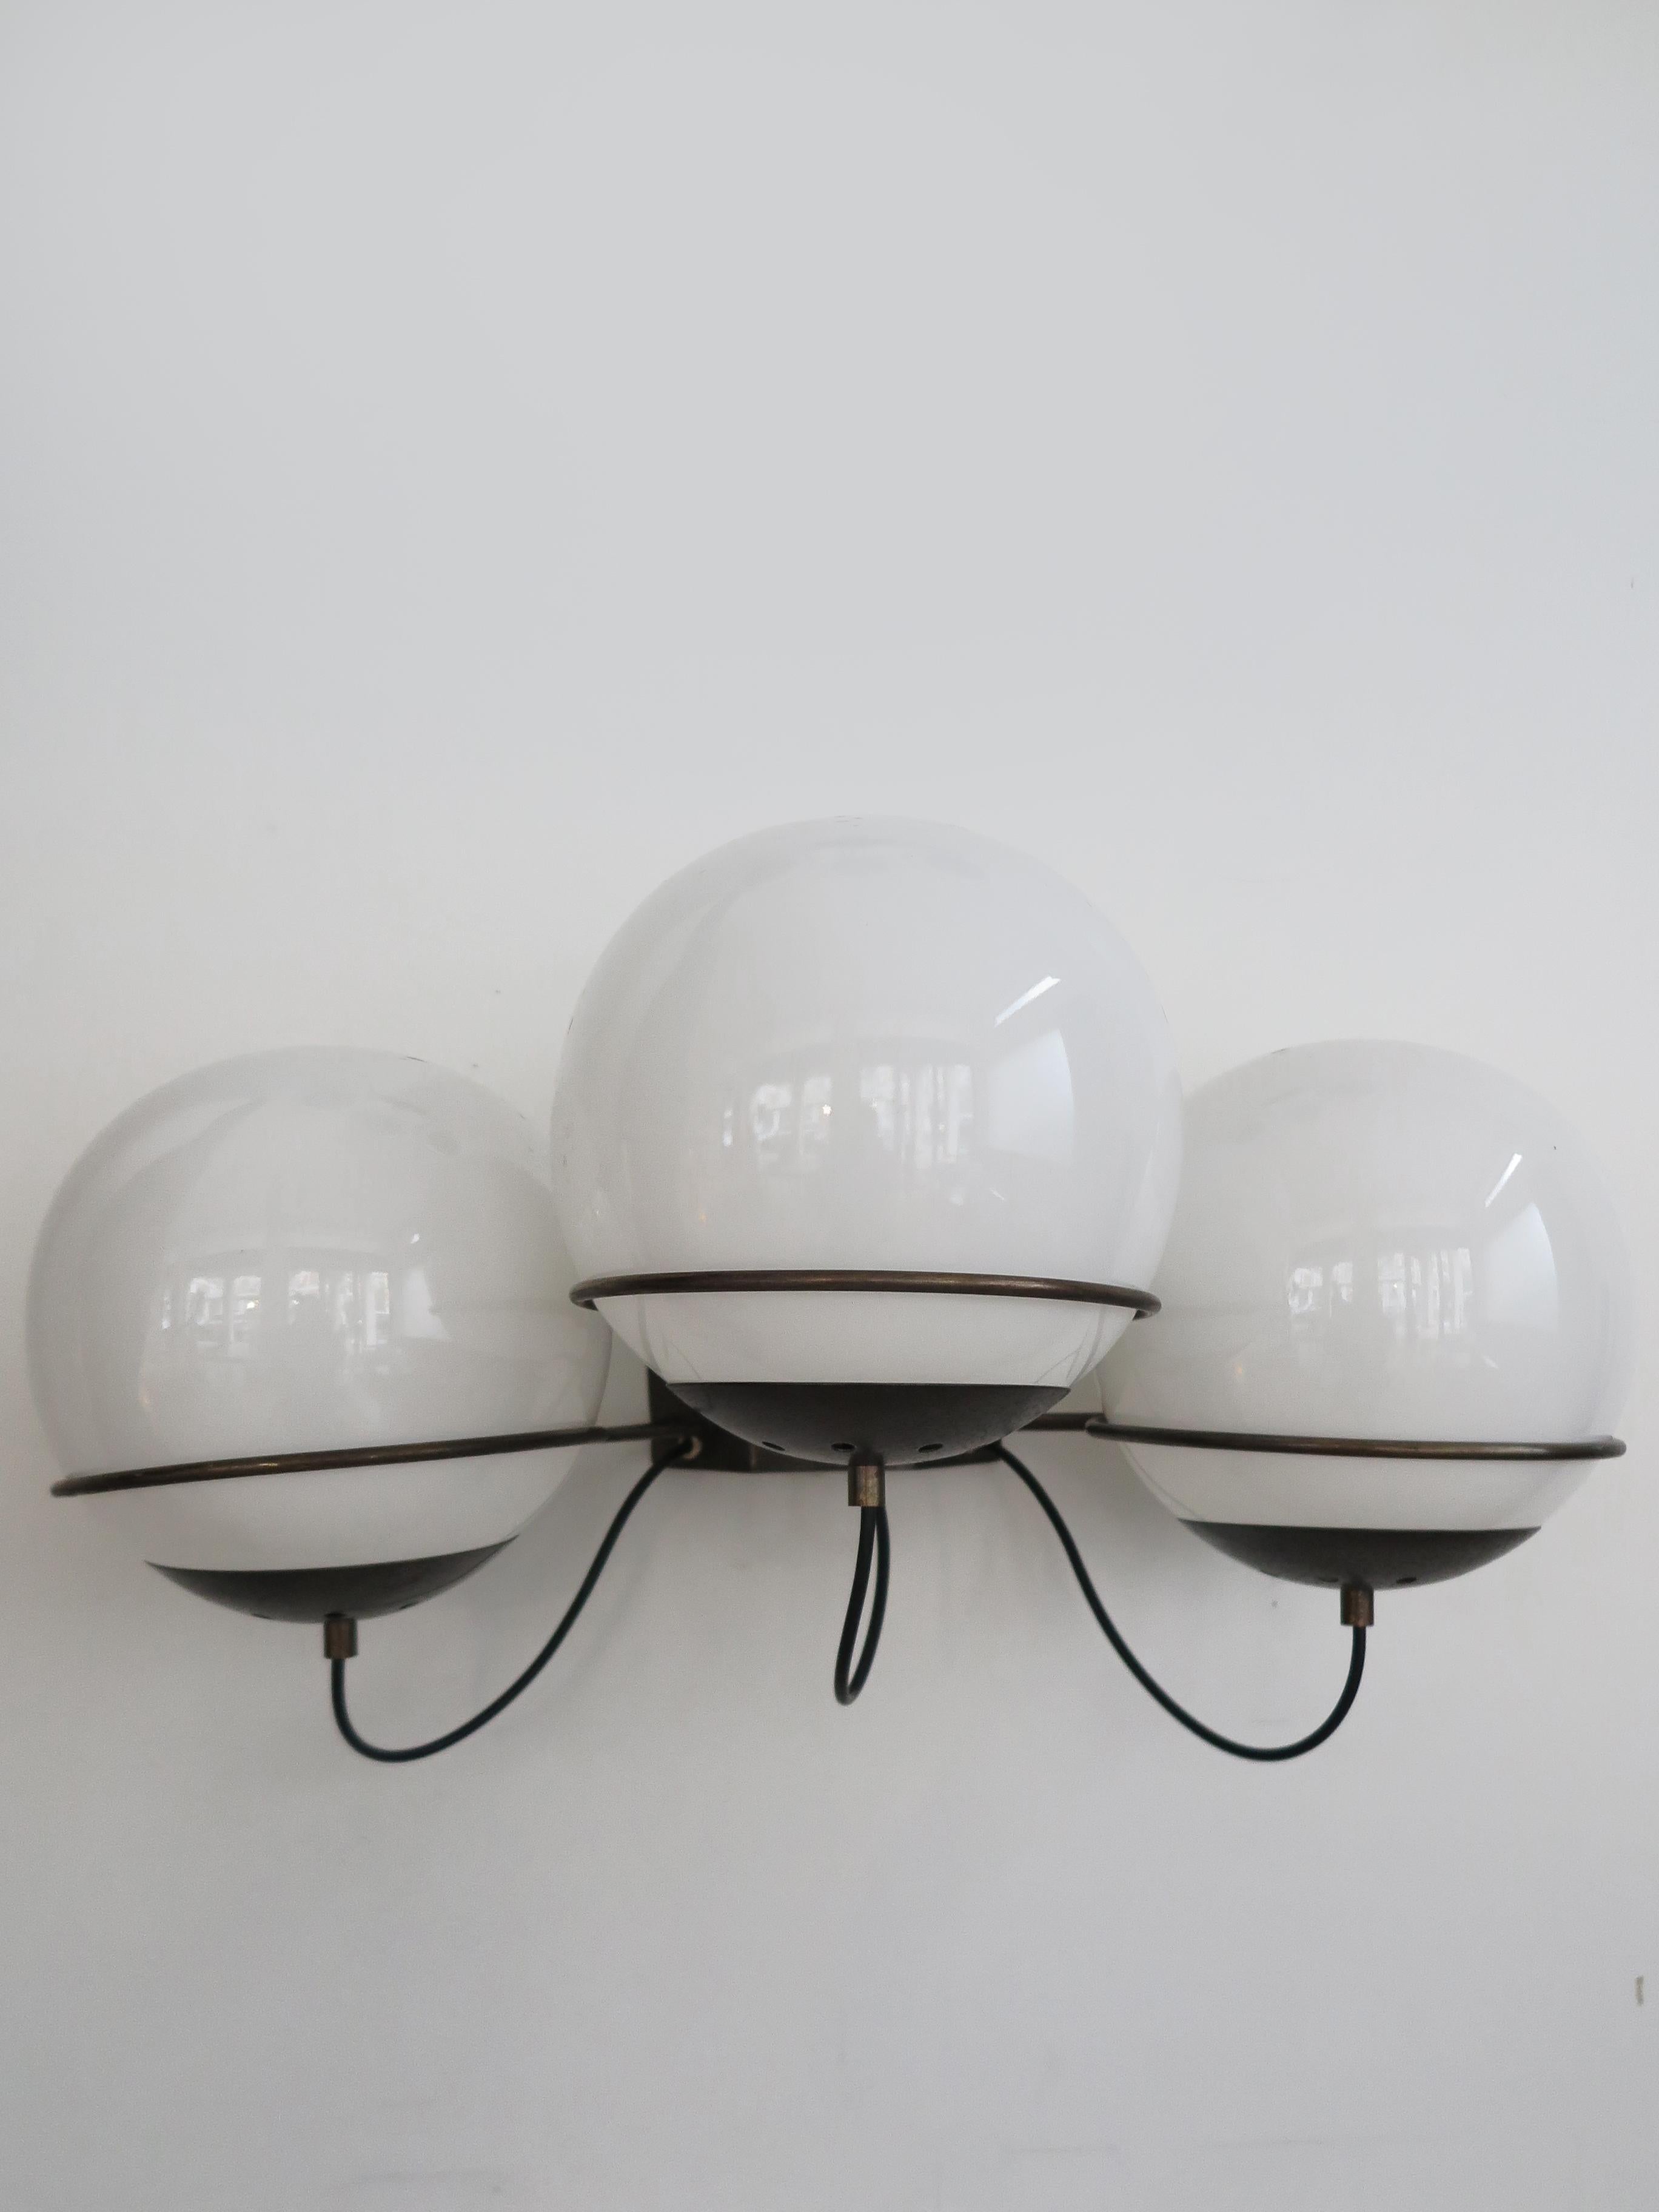 Candle Midcentury Italian Metal Glass Sconces Wall Lights 1960s For Sale 2